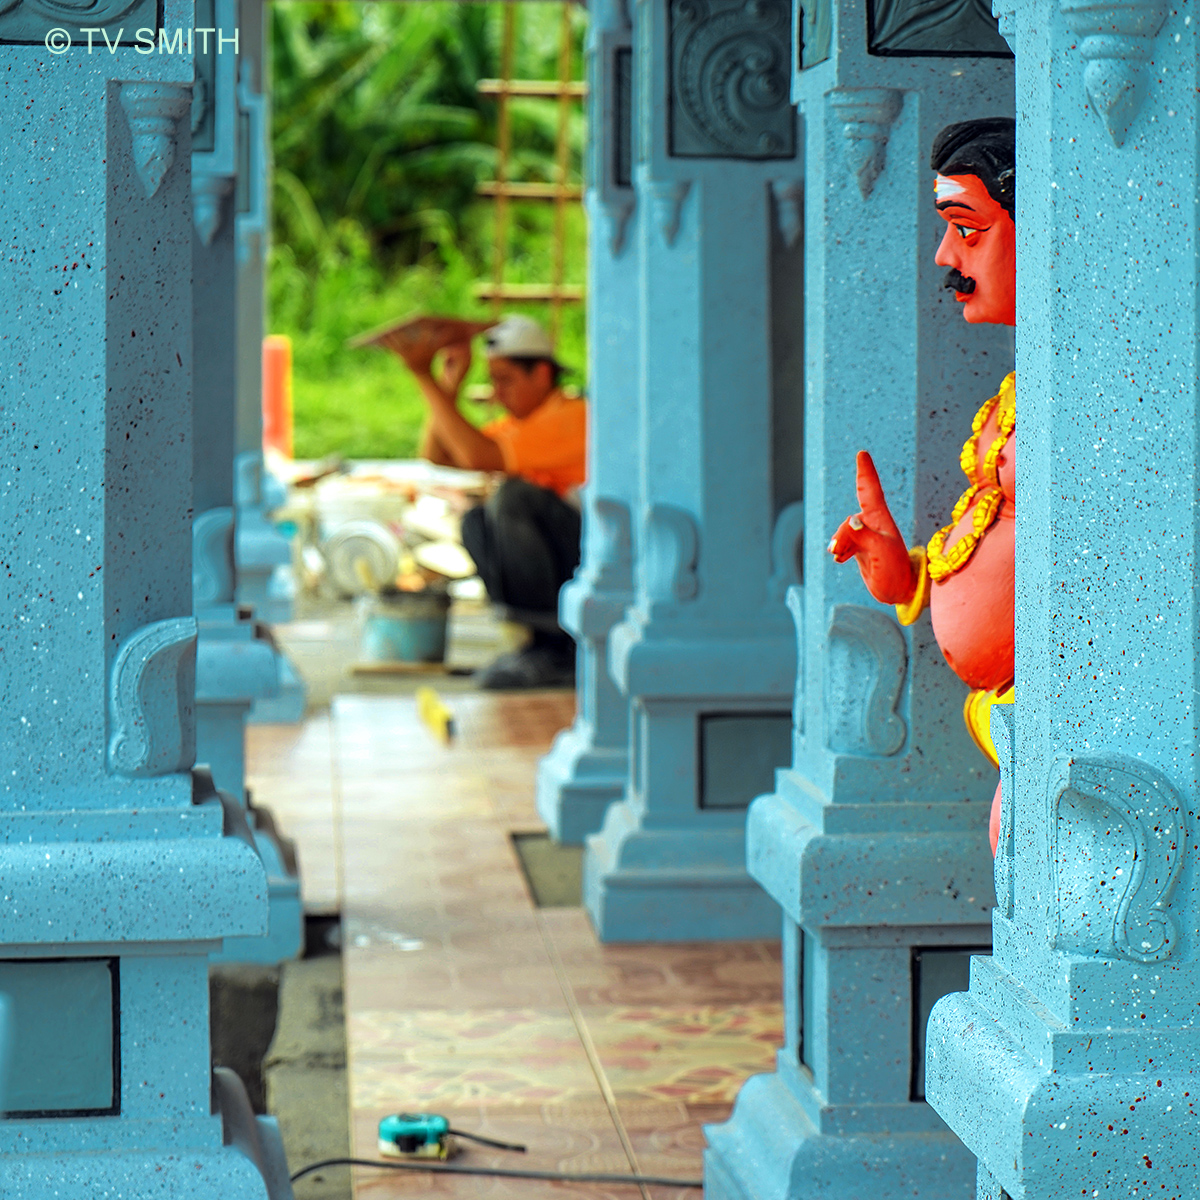 Hindu Temple Statue Supervising A Chinese Tile Installer